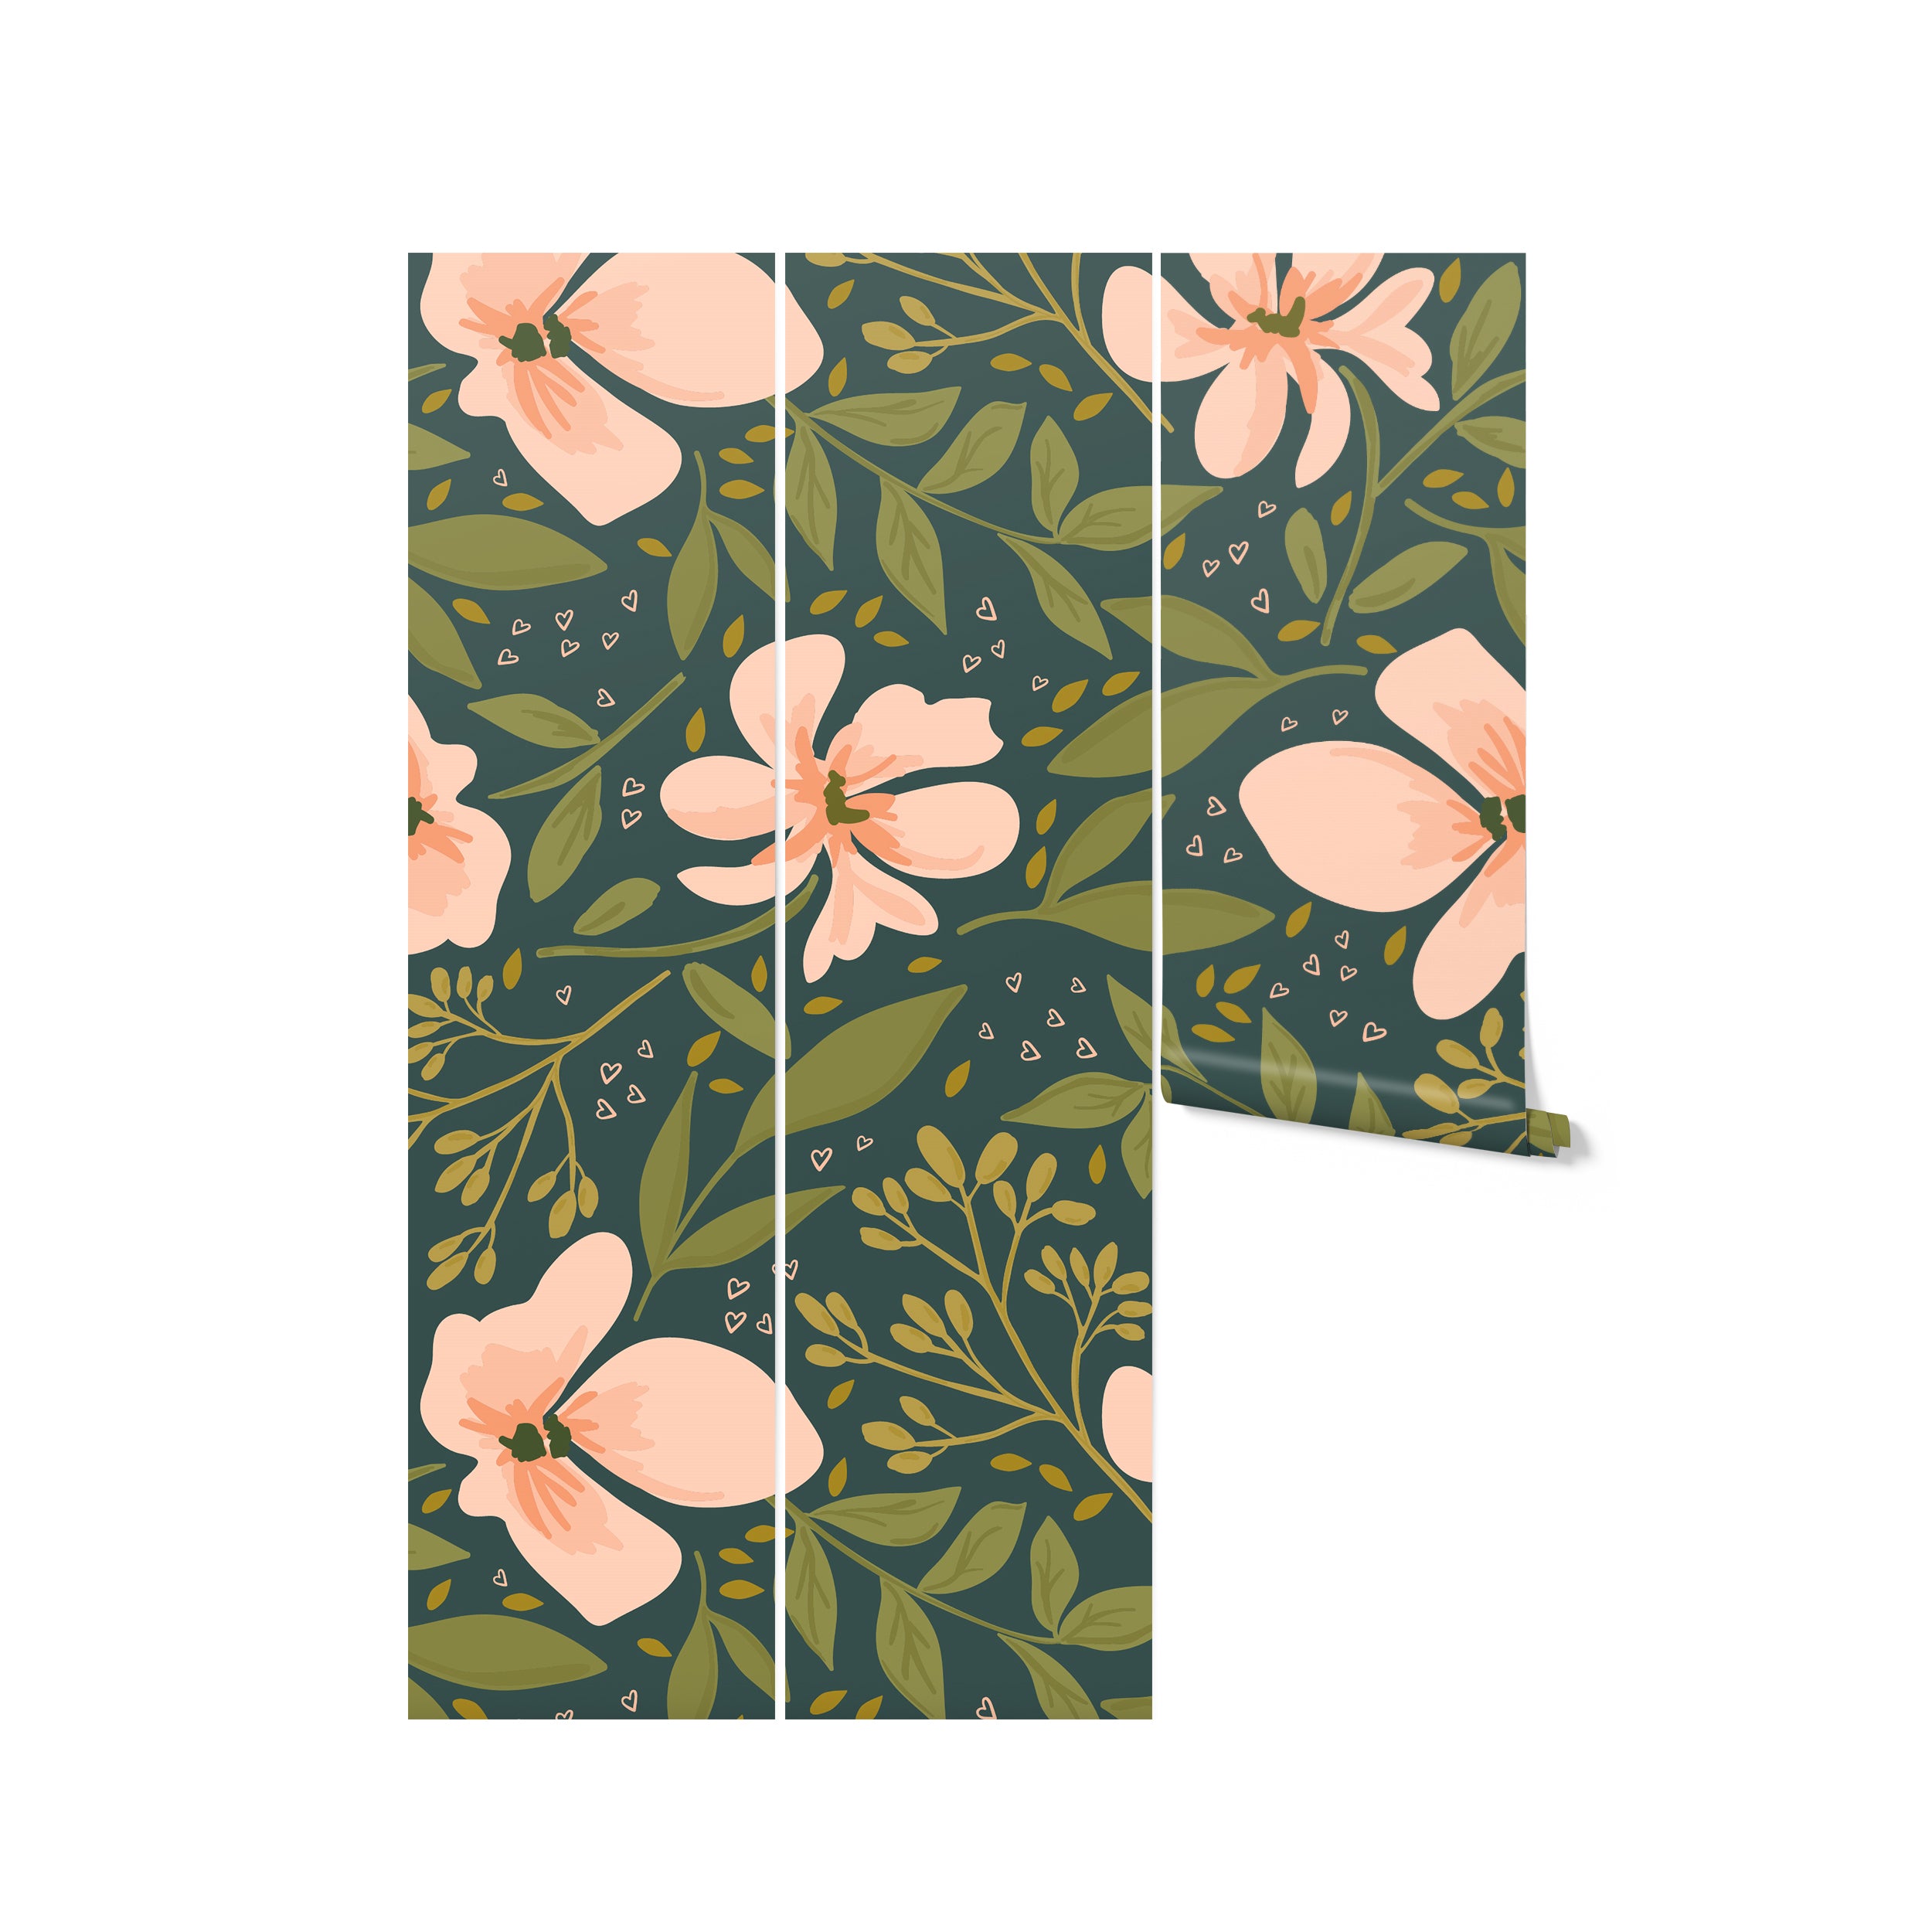 A roll of 'Floral Love Watercolour Wallpaper' featuring a floral pattern with pink blooms, green foliage, and heart details against a dark green background, ready to transform a space with its romantic watercolor charm.